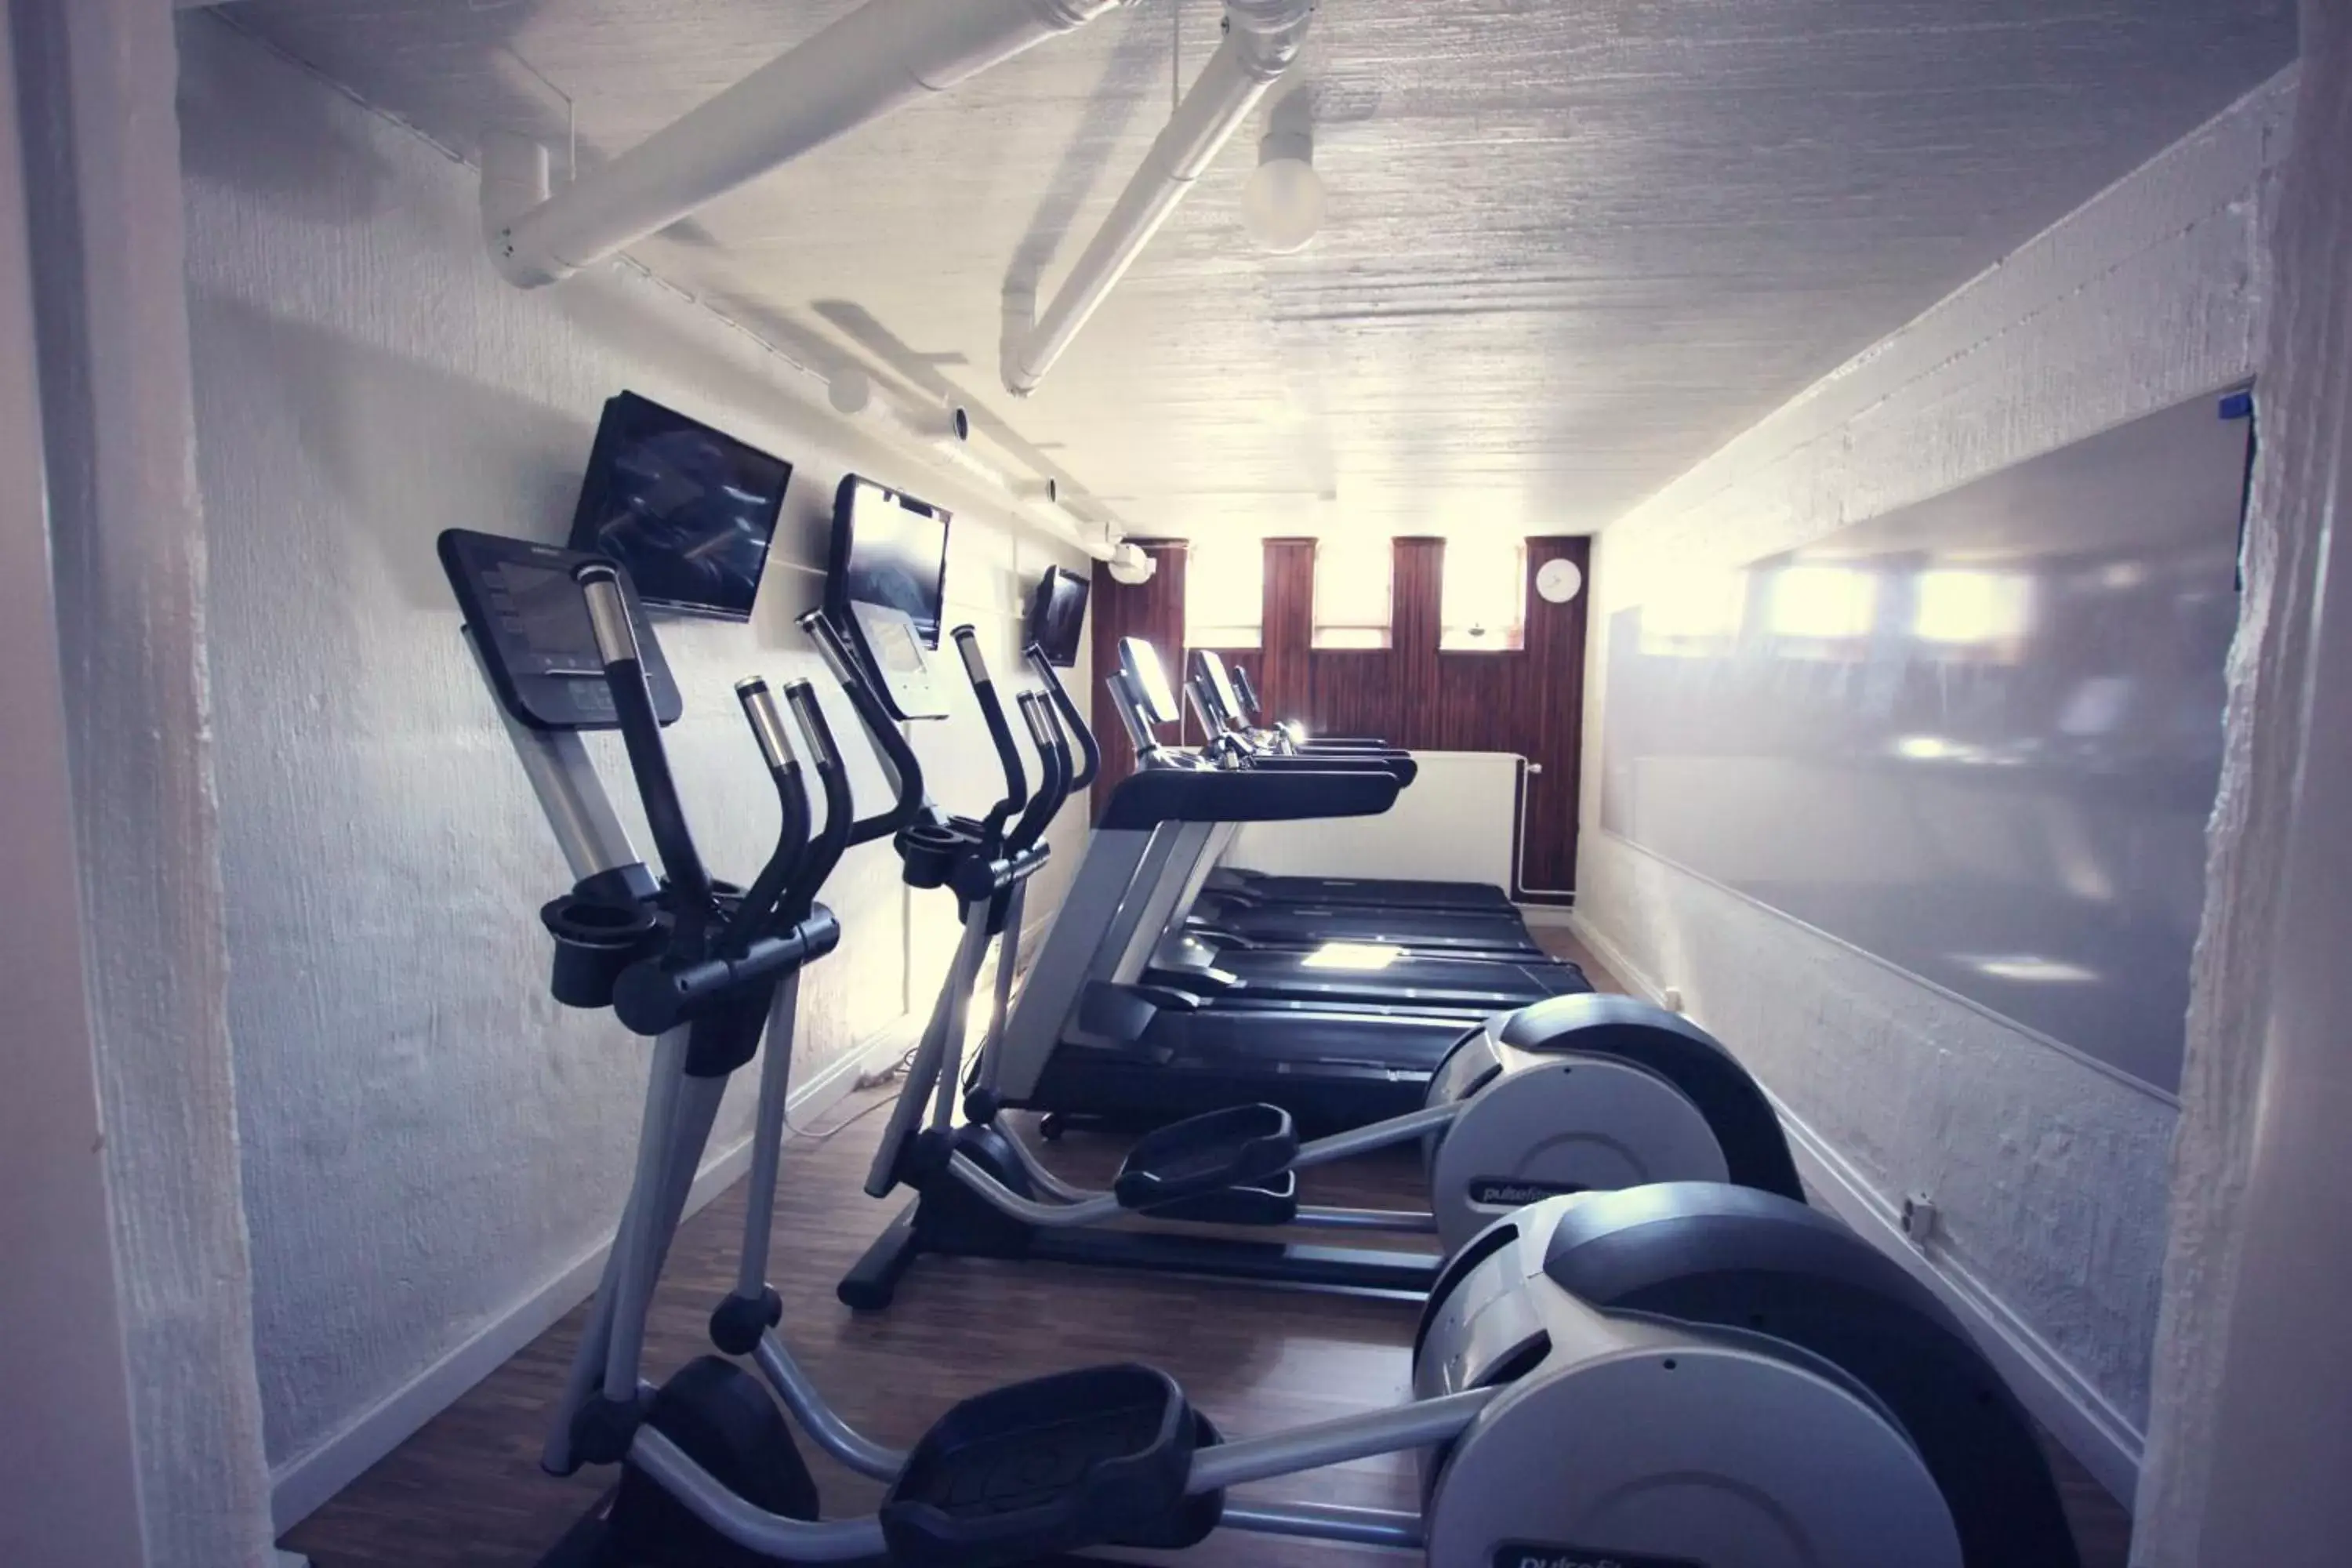 Fitness centre/facilities, Fitness Center/Facilities in Best Western Hotel Arctic Eden